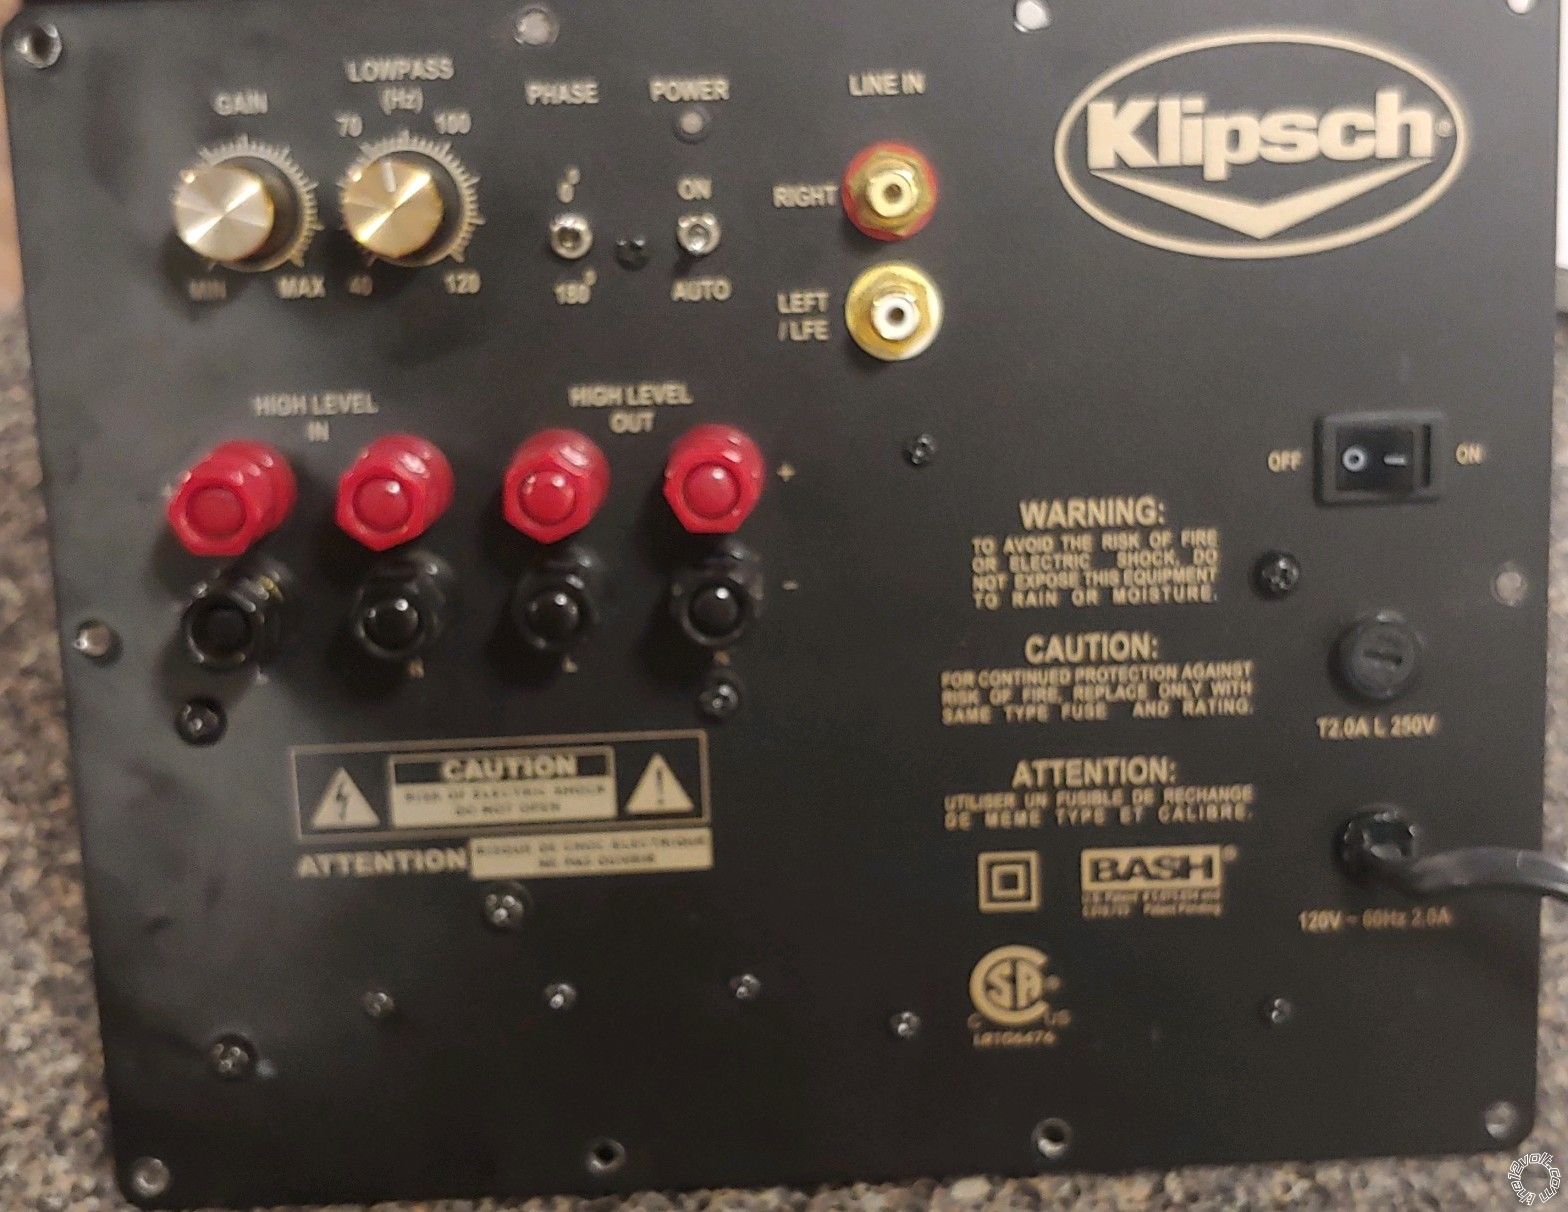 Need Replacement For This Transformer, Klipsch RPW-10 -- posted image.